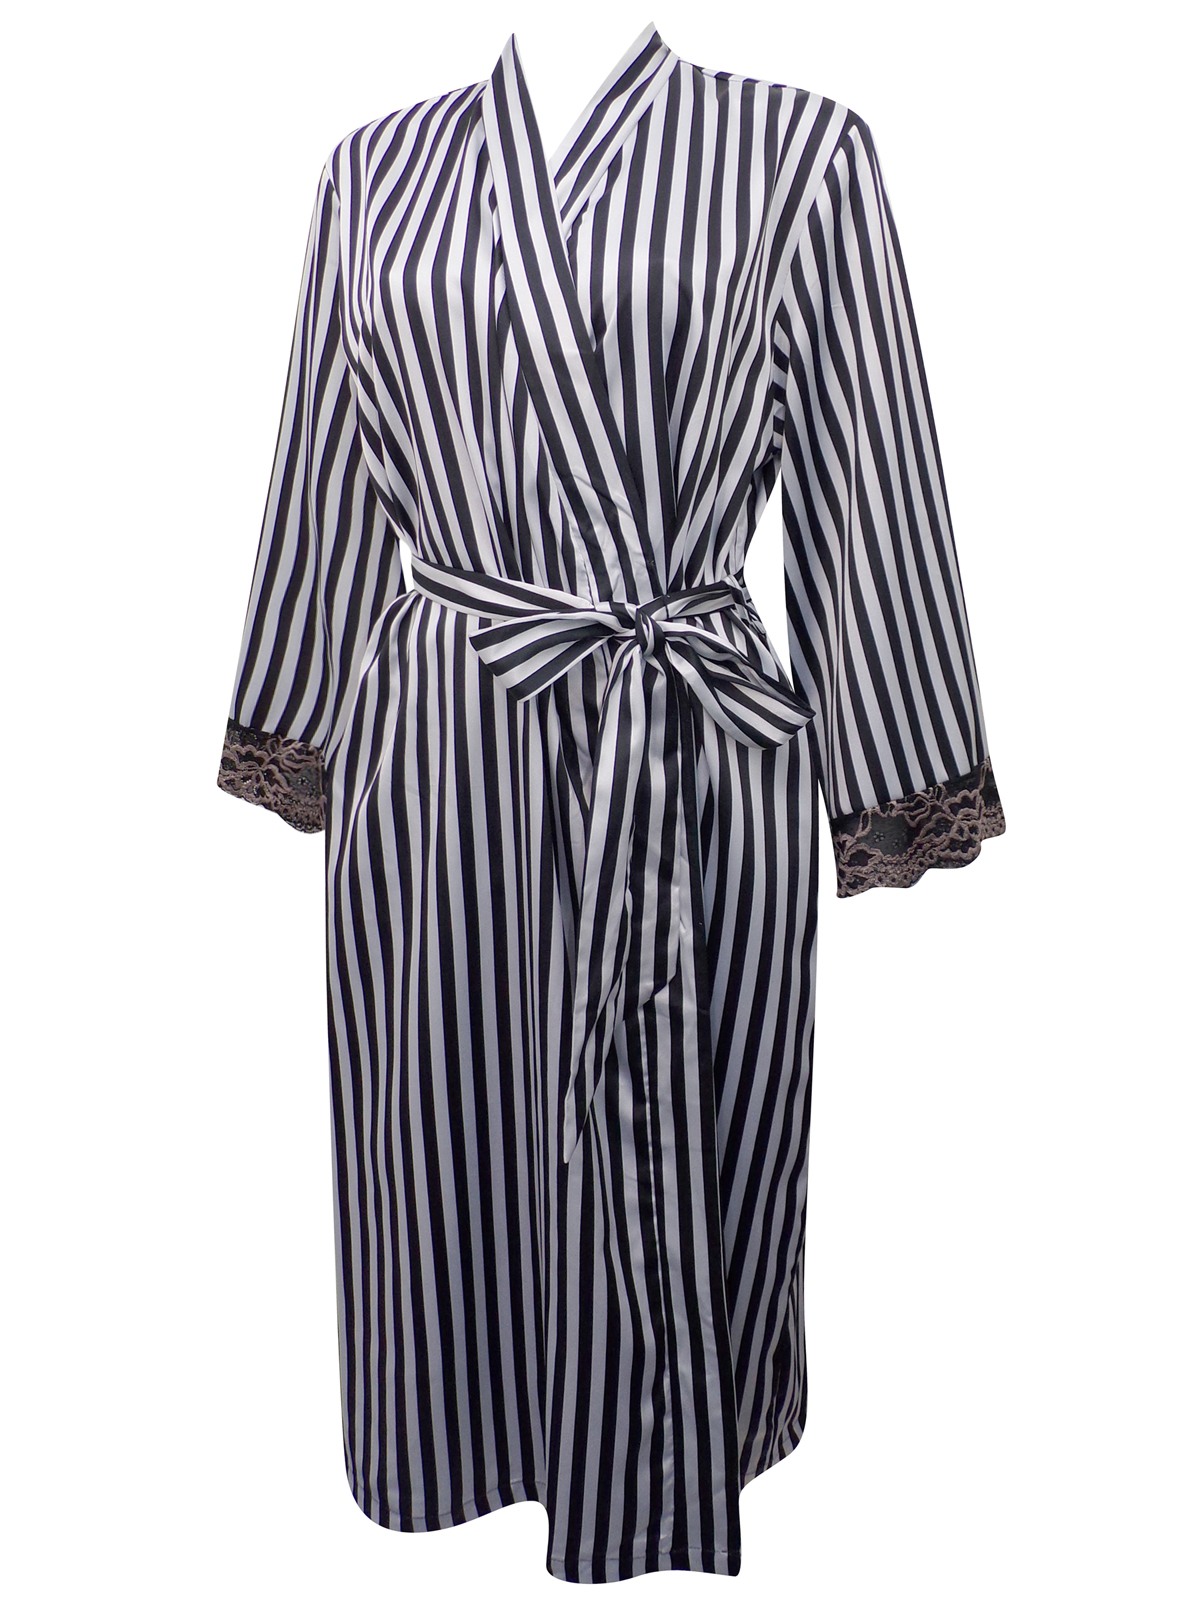 Peter New York - - Peter New York BLACK Striped Contrast Lace Trim ...